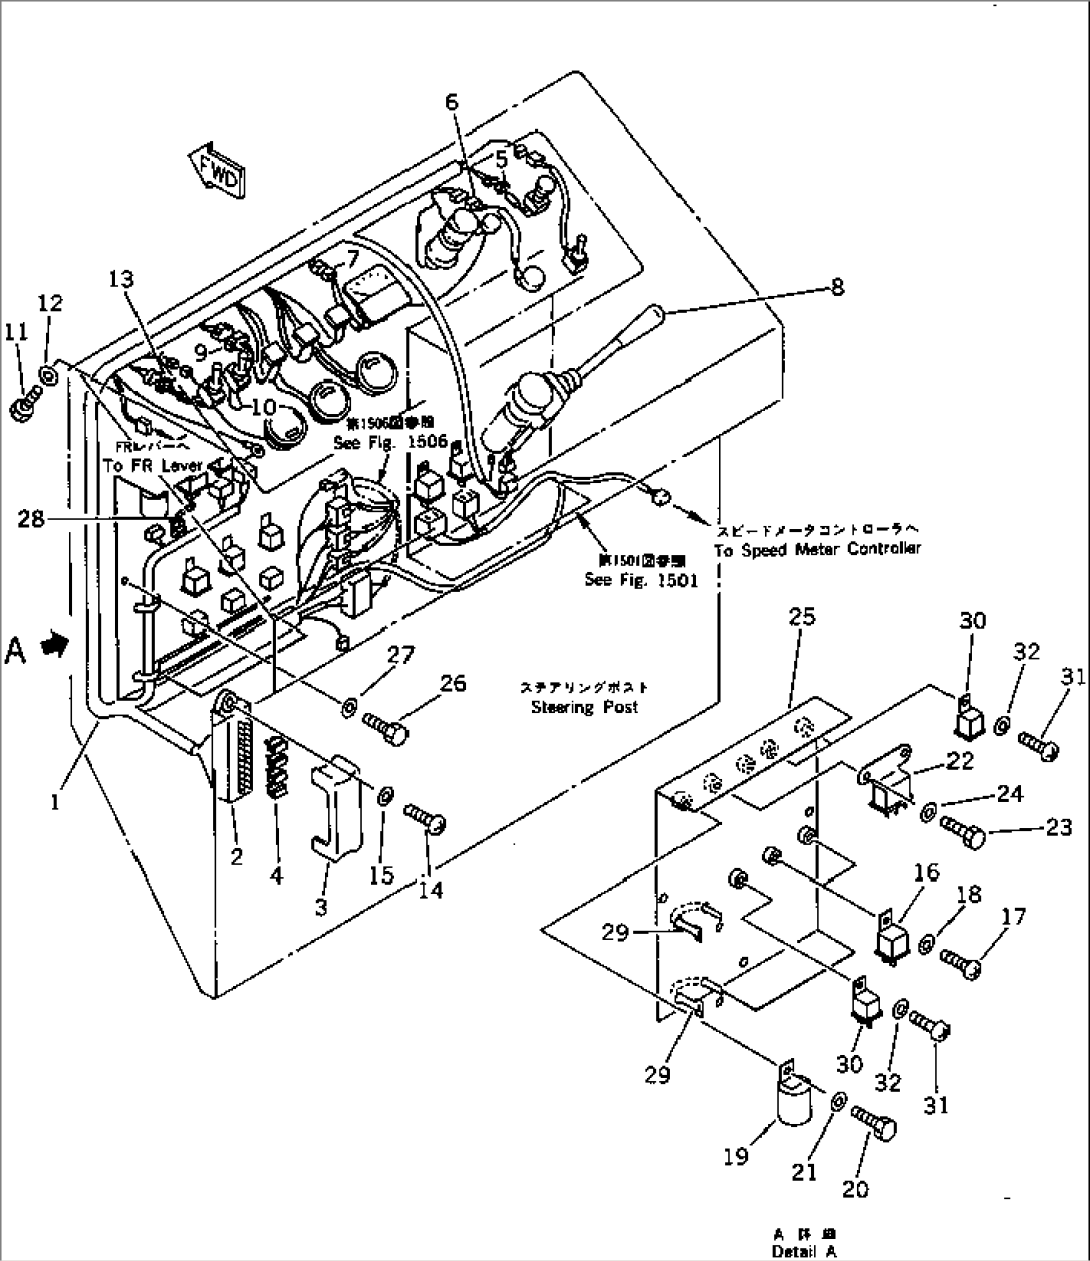 ELECTRICAL SYSTEM (CENTER) (2/3)